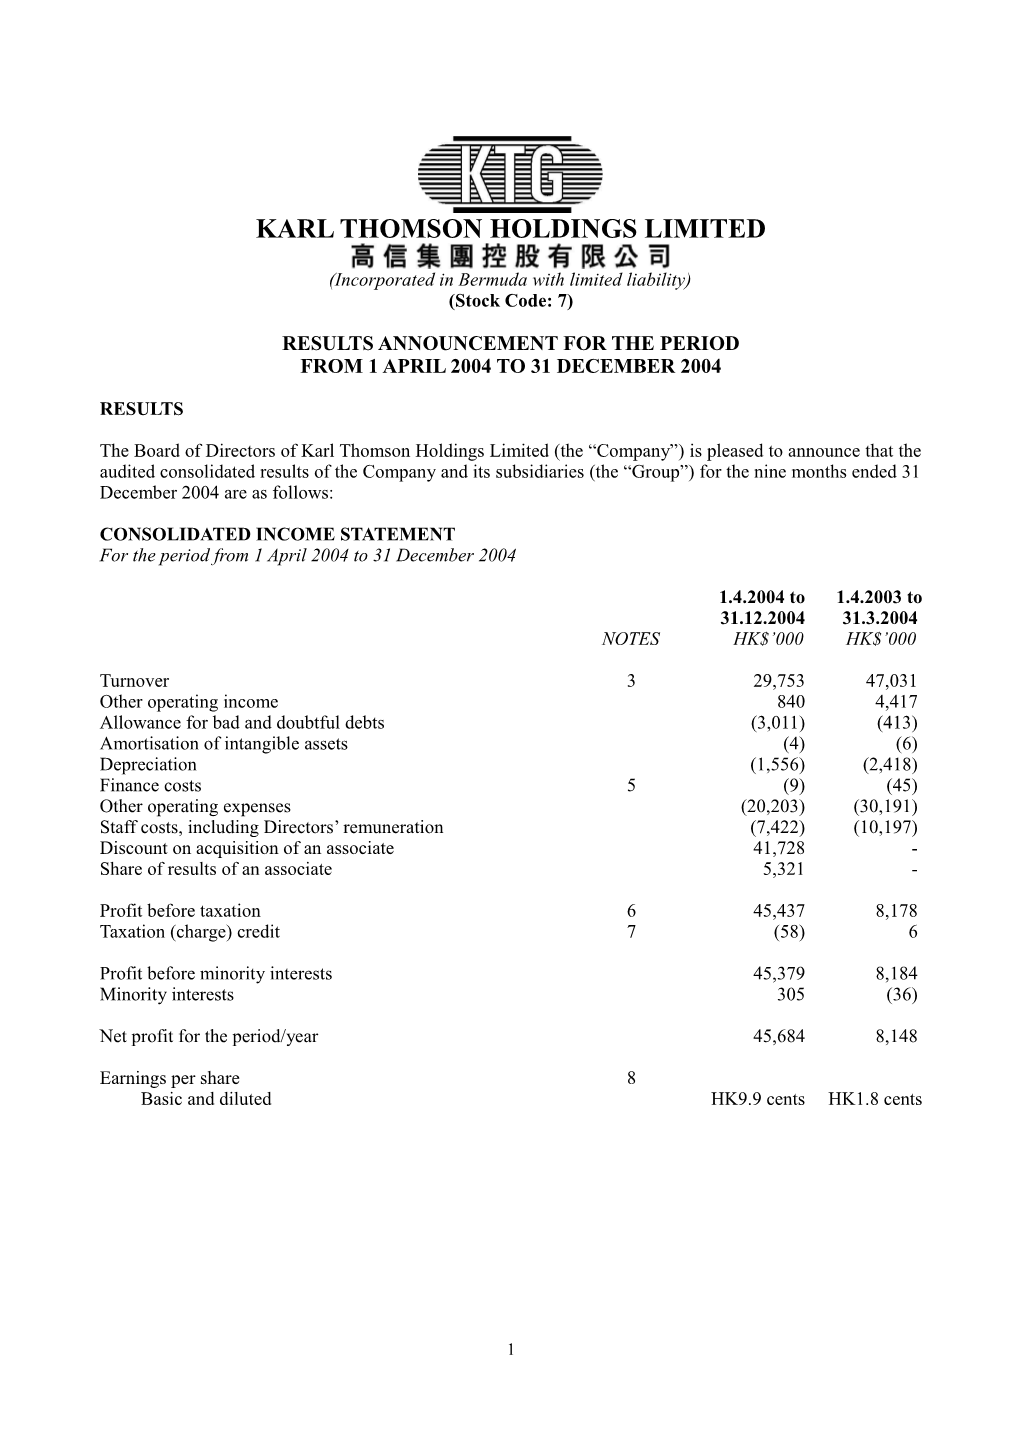 Karl Thomson Holdings Limited